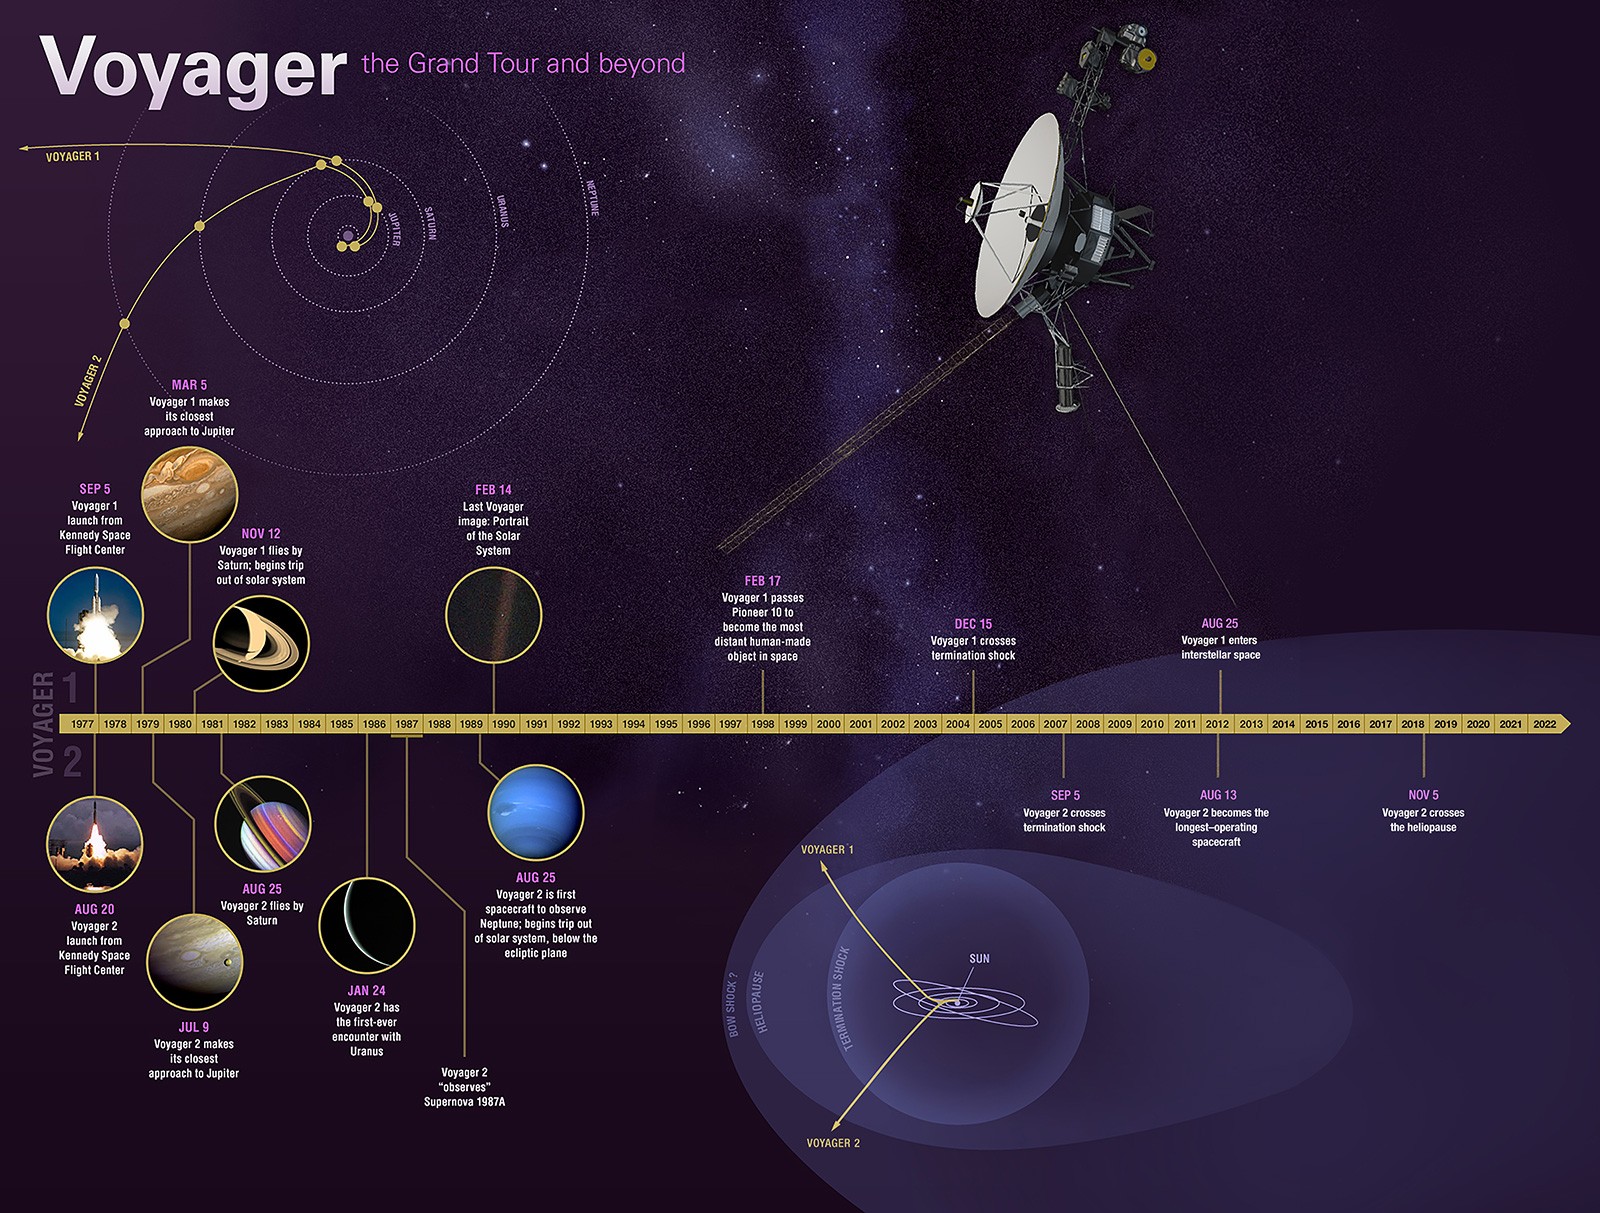 what is voyager 2 destination